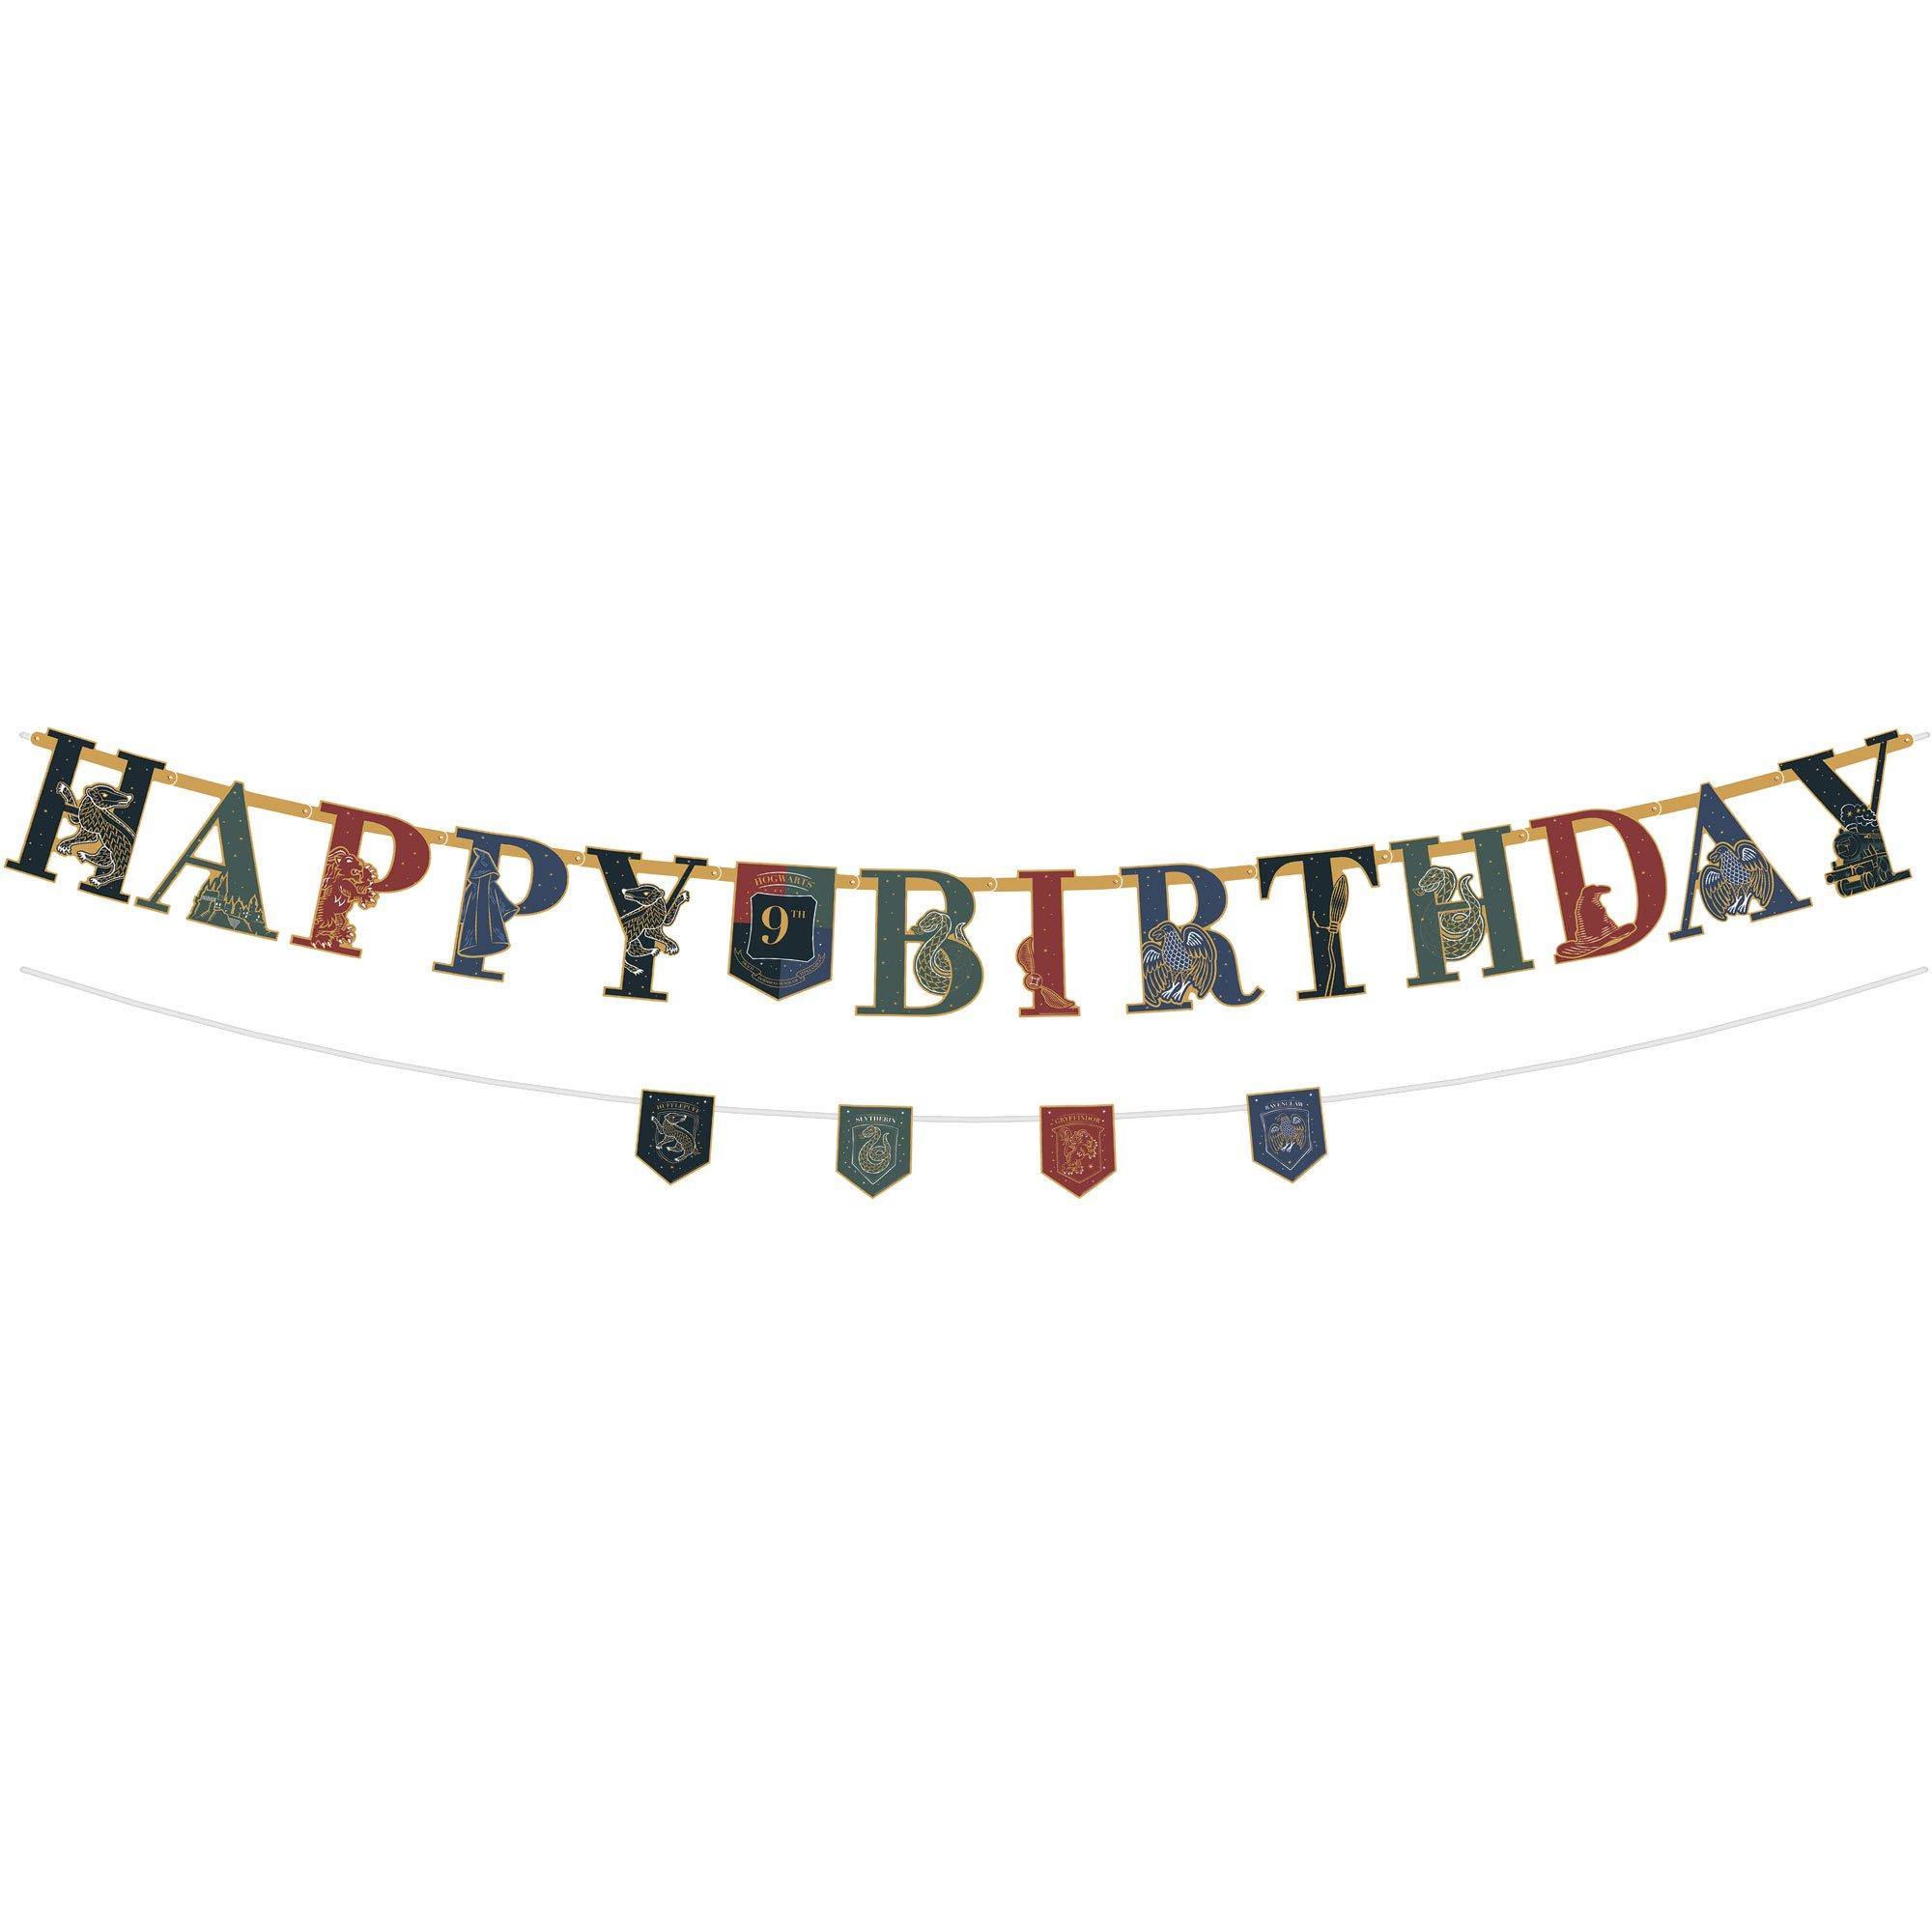 Hogwarts Harry Potter Birthday Party Banner - Custom Party Creations